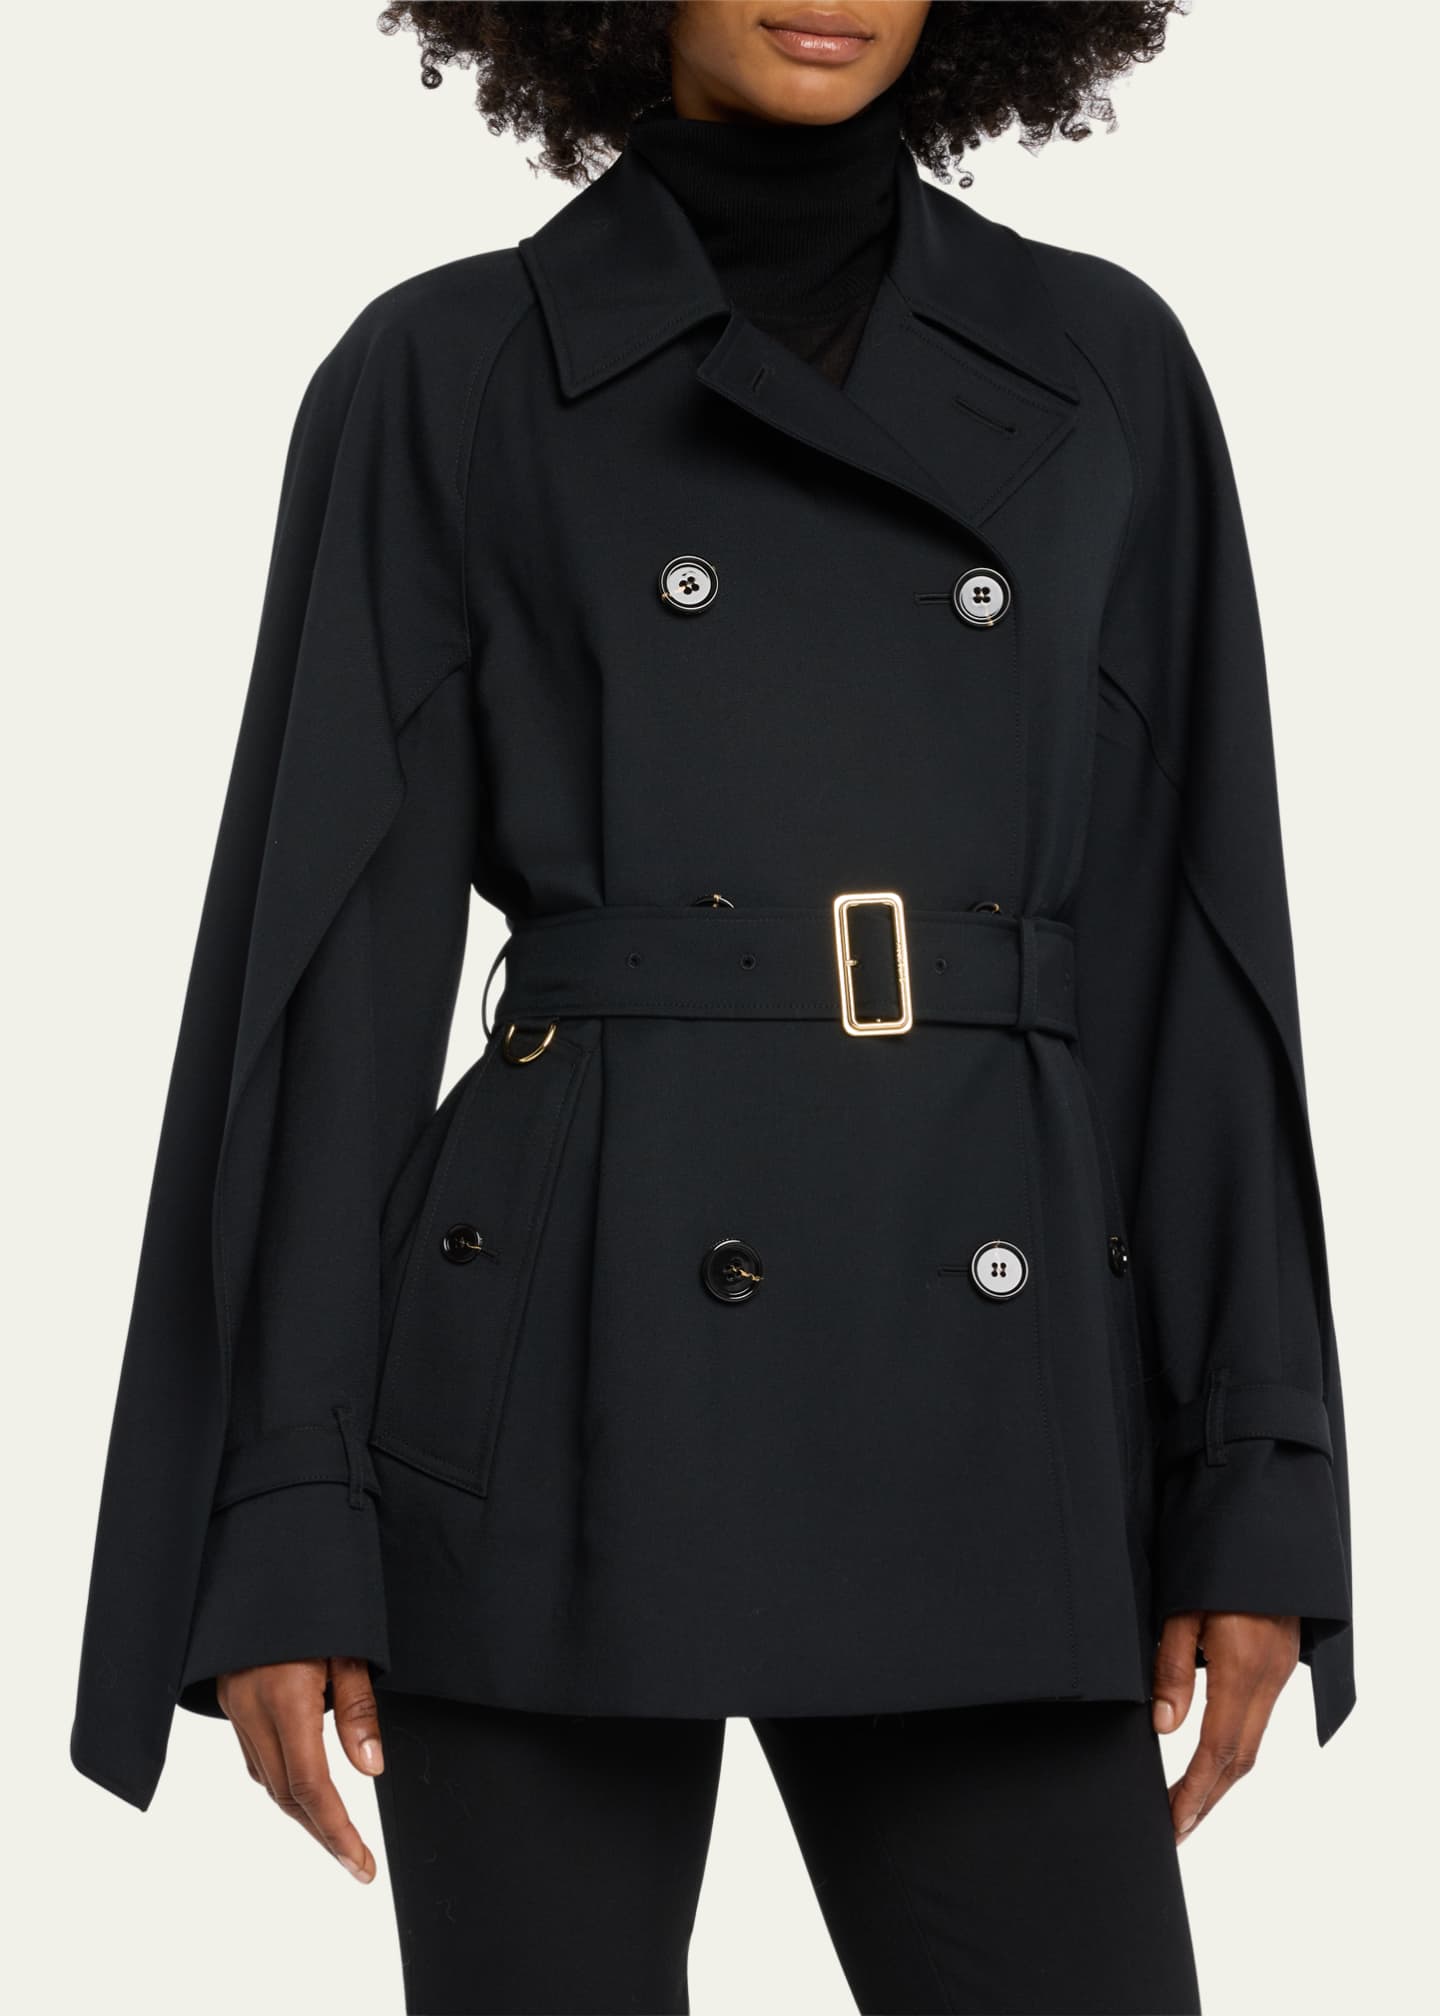 Burberry Cotness Belted Double-Breasted Trench Coat - Bergdorf Goodman